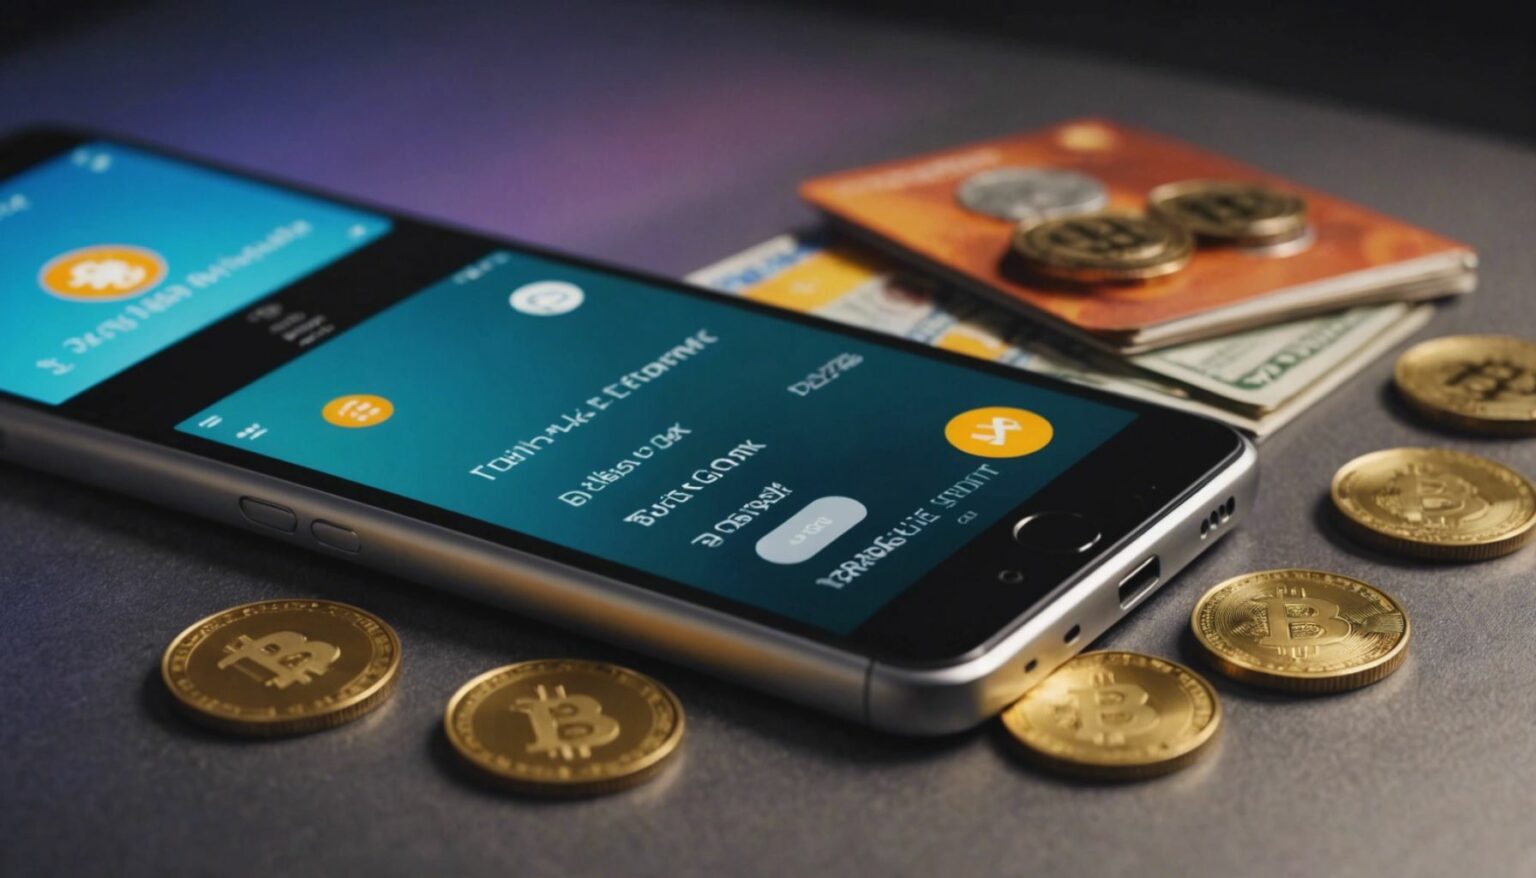 Thumbnail showing a digital wallet, crypto coins, and a beginner's guidebook on a gradient background.